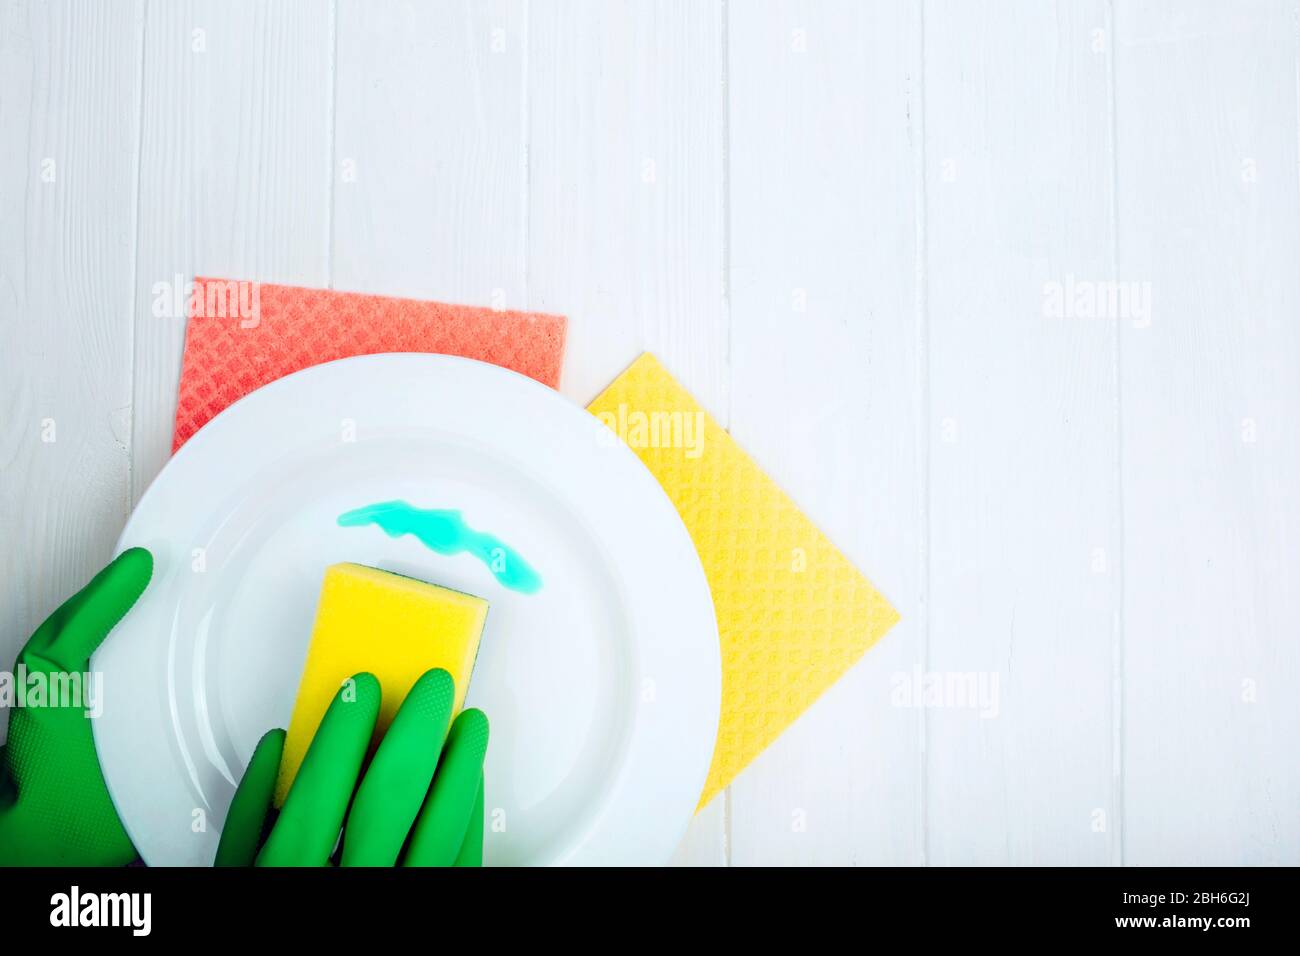 hands in rubber gloves washing dishes, top view with copy space Stock Photo